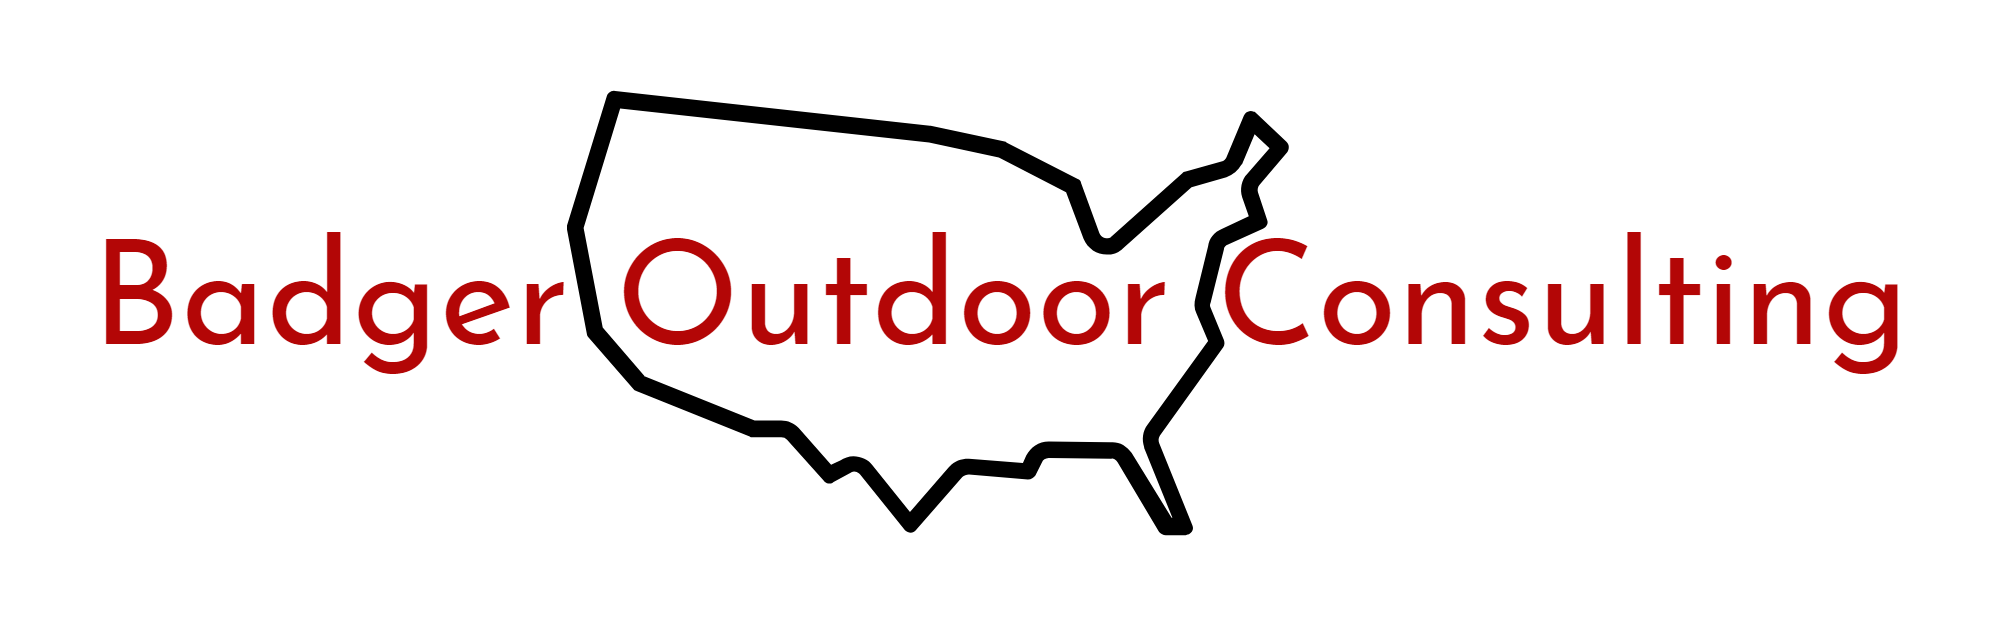 Badger Outdoor Consulting